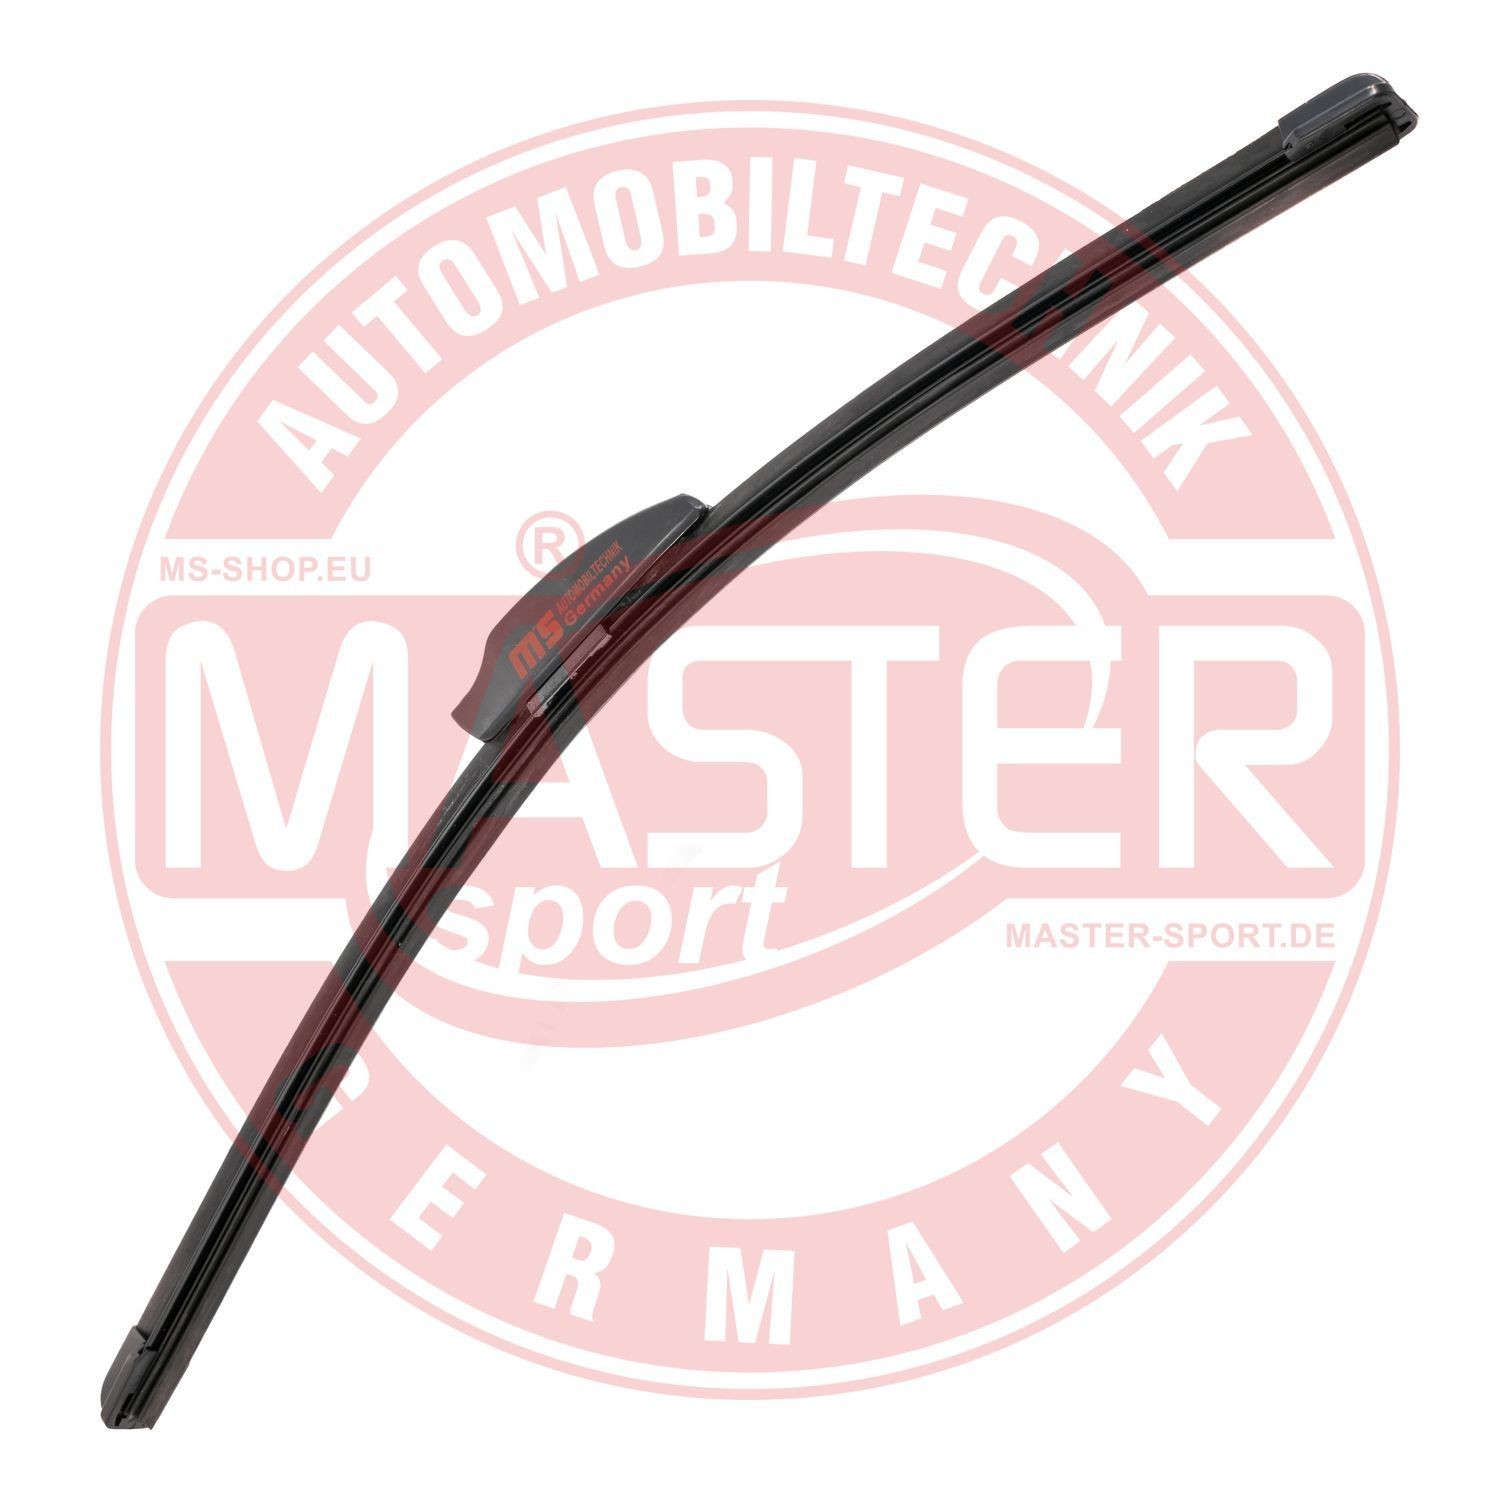 Original MASTER-SPORT Windshield wipers 19-B-PCS-MS for MERCEDES-BENZ 190